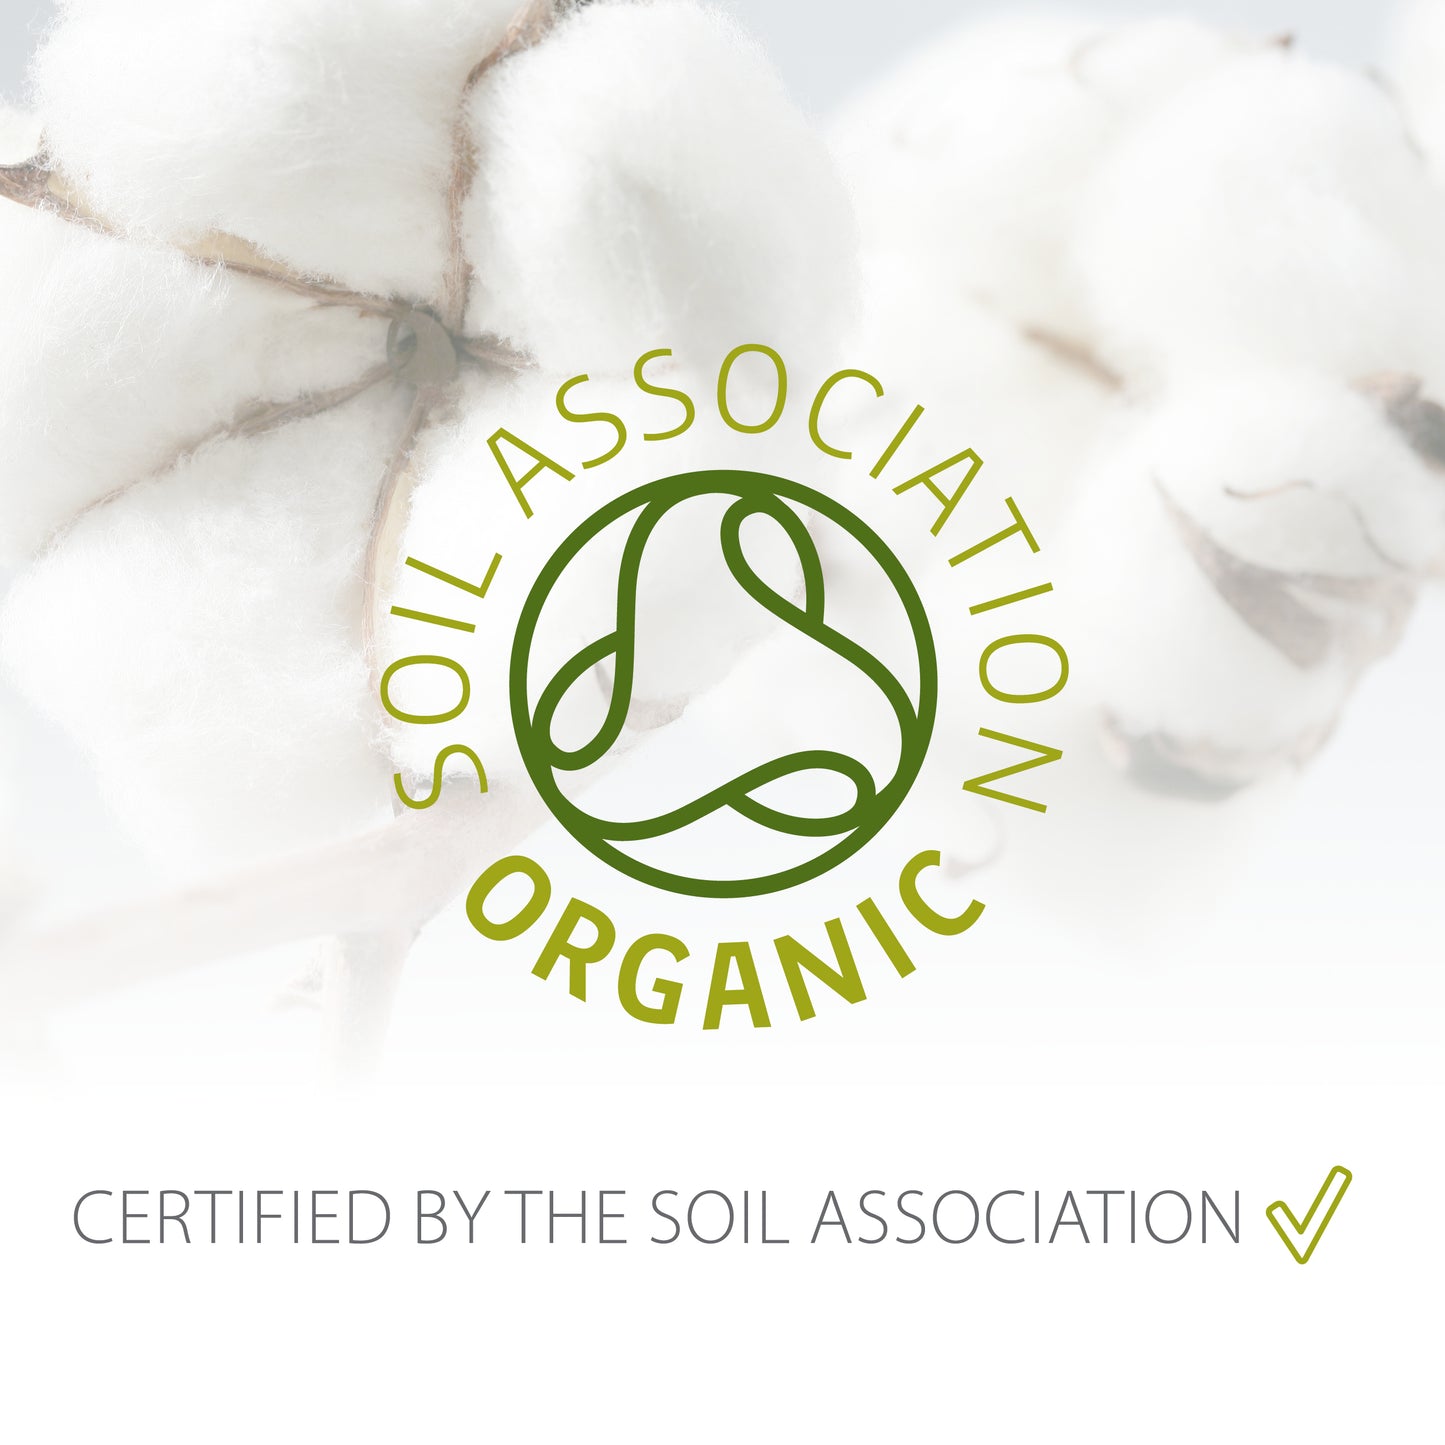 These standards set out the requirements for organic and natural health and beauty products certified to the internationally-recognised COSMOS standard and for Soil Association Health and Beauty Certified Products.